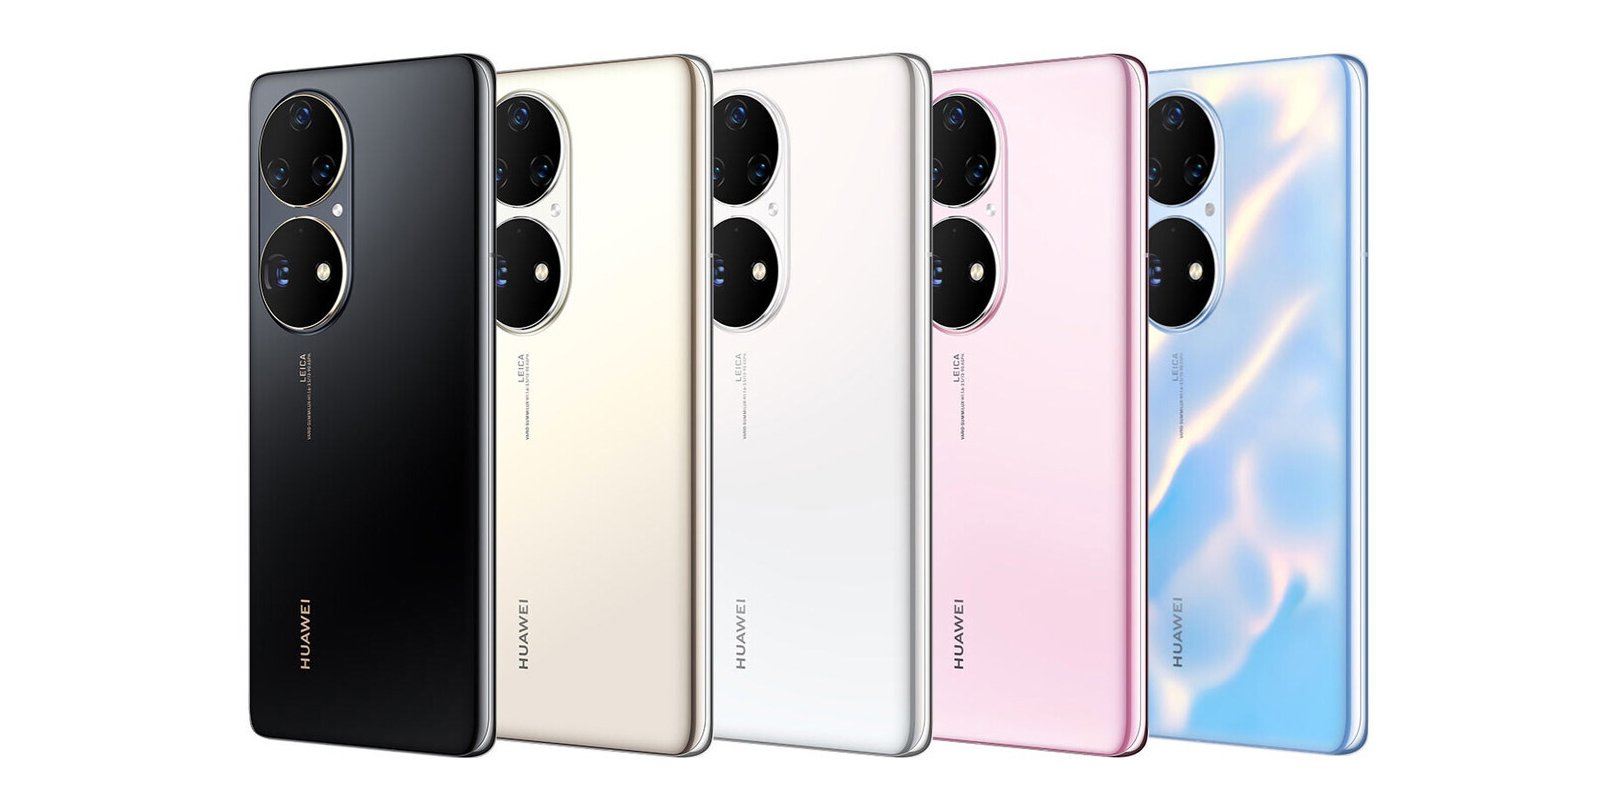 Huawei flagship smartphones announced with updated processor and new OS